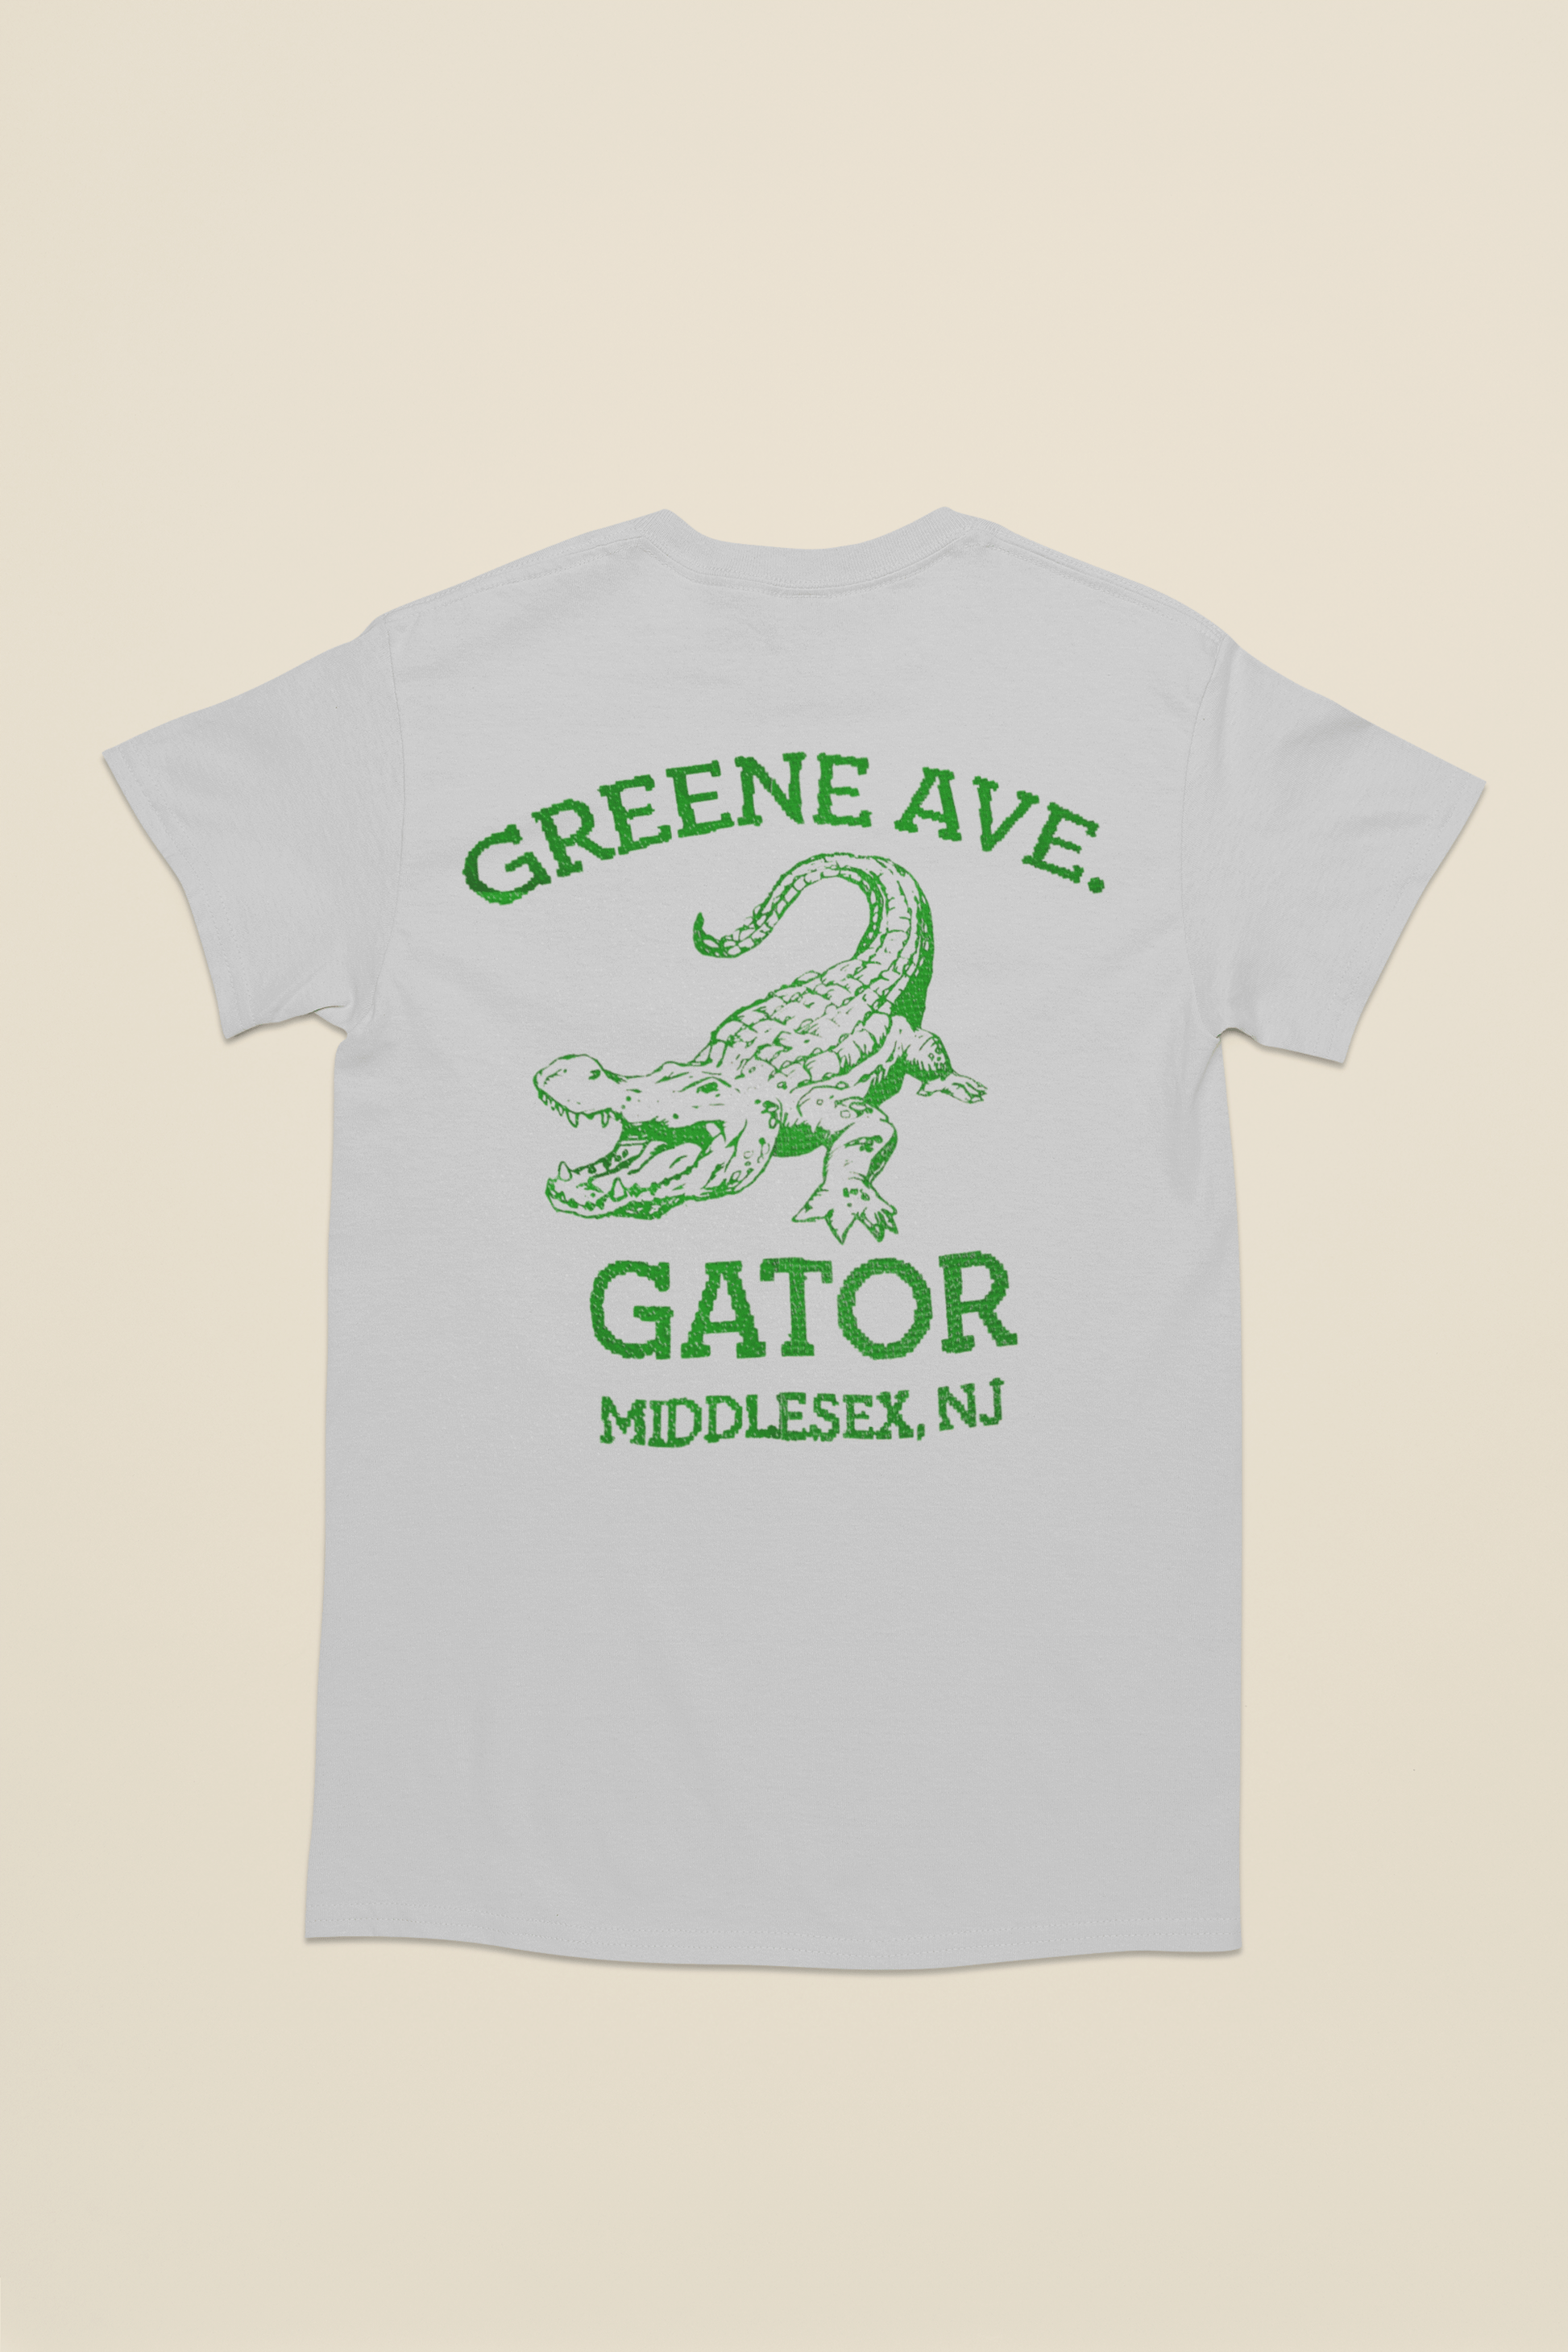 Middlesex NJ Alligaor T Shirt T-Shirts , special offers Rockvieetees